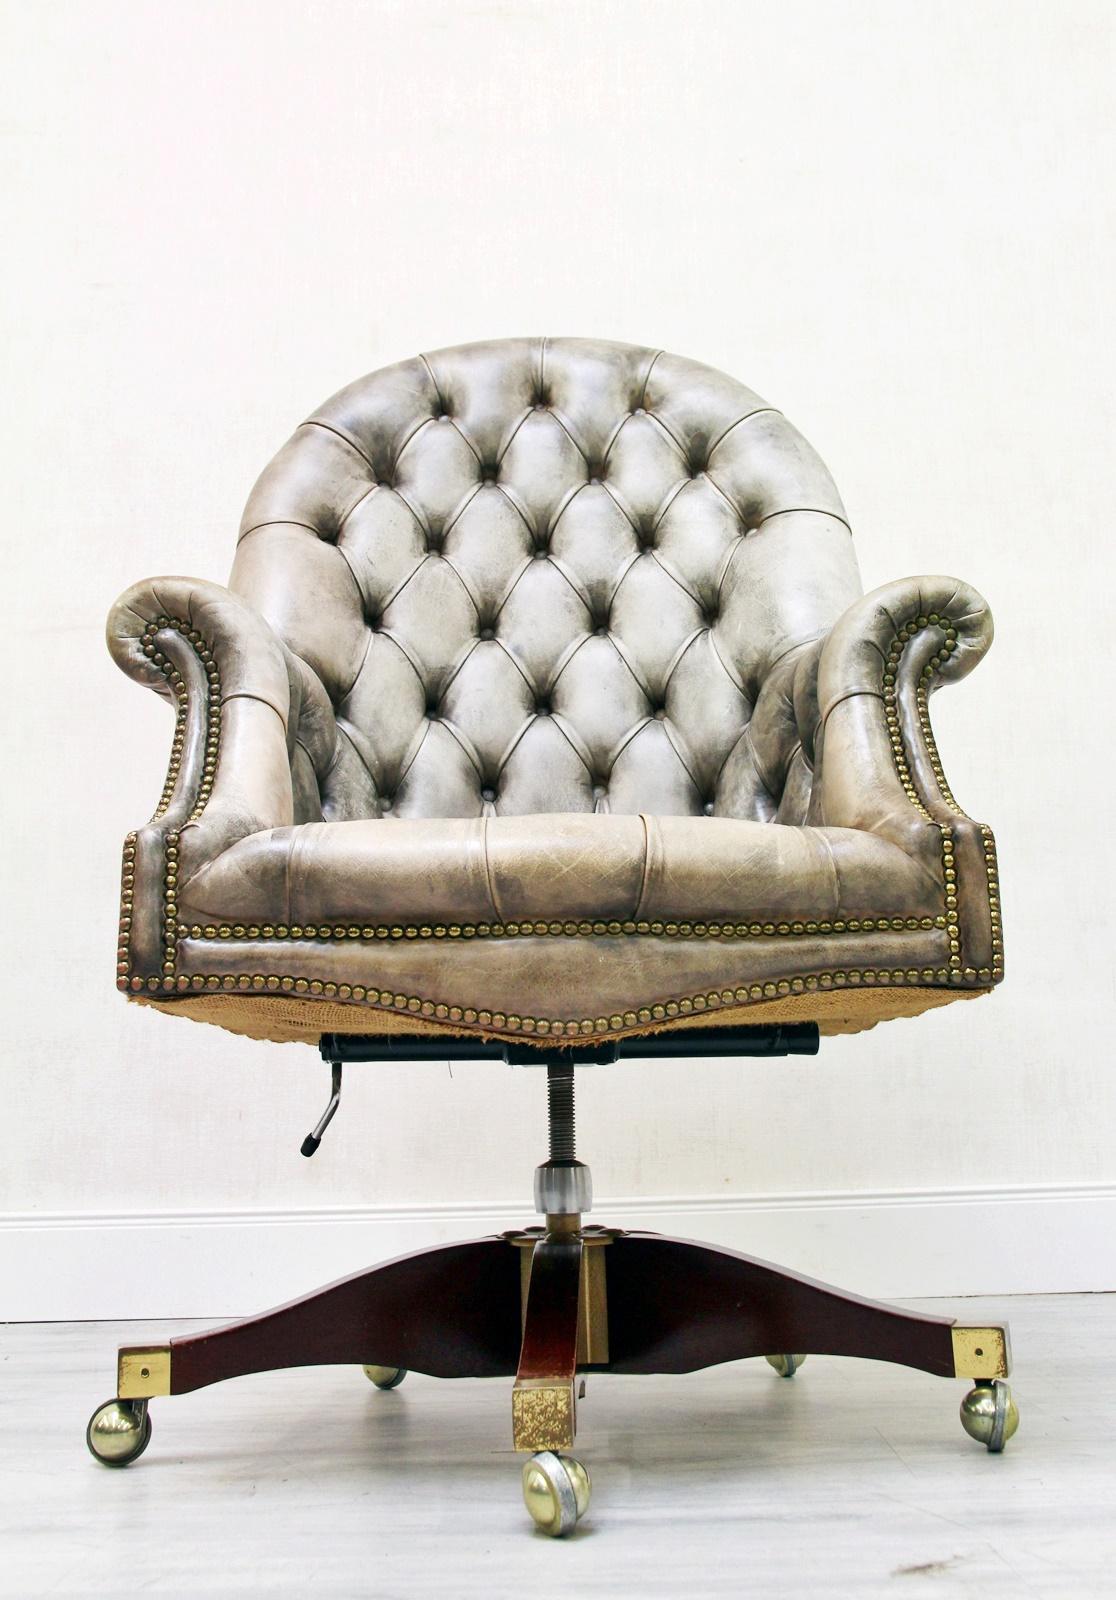 Guaranteed handmade
Offered Chesterfield armchair from England 360 ° rotatable and height adjustable.
This piece is artwork of the highest quality in materials and crafts worked.
Please look at the furniture with patience and attention. Every